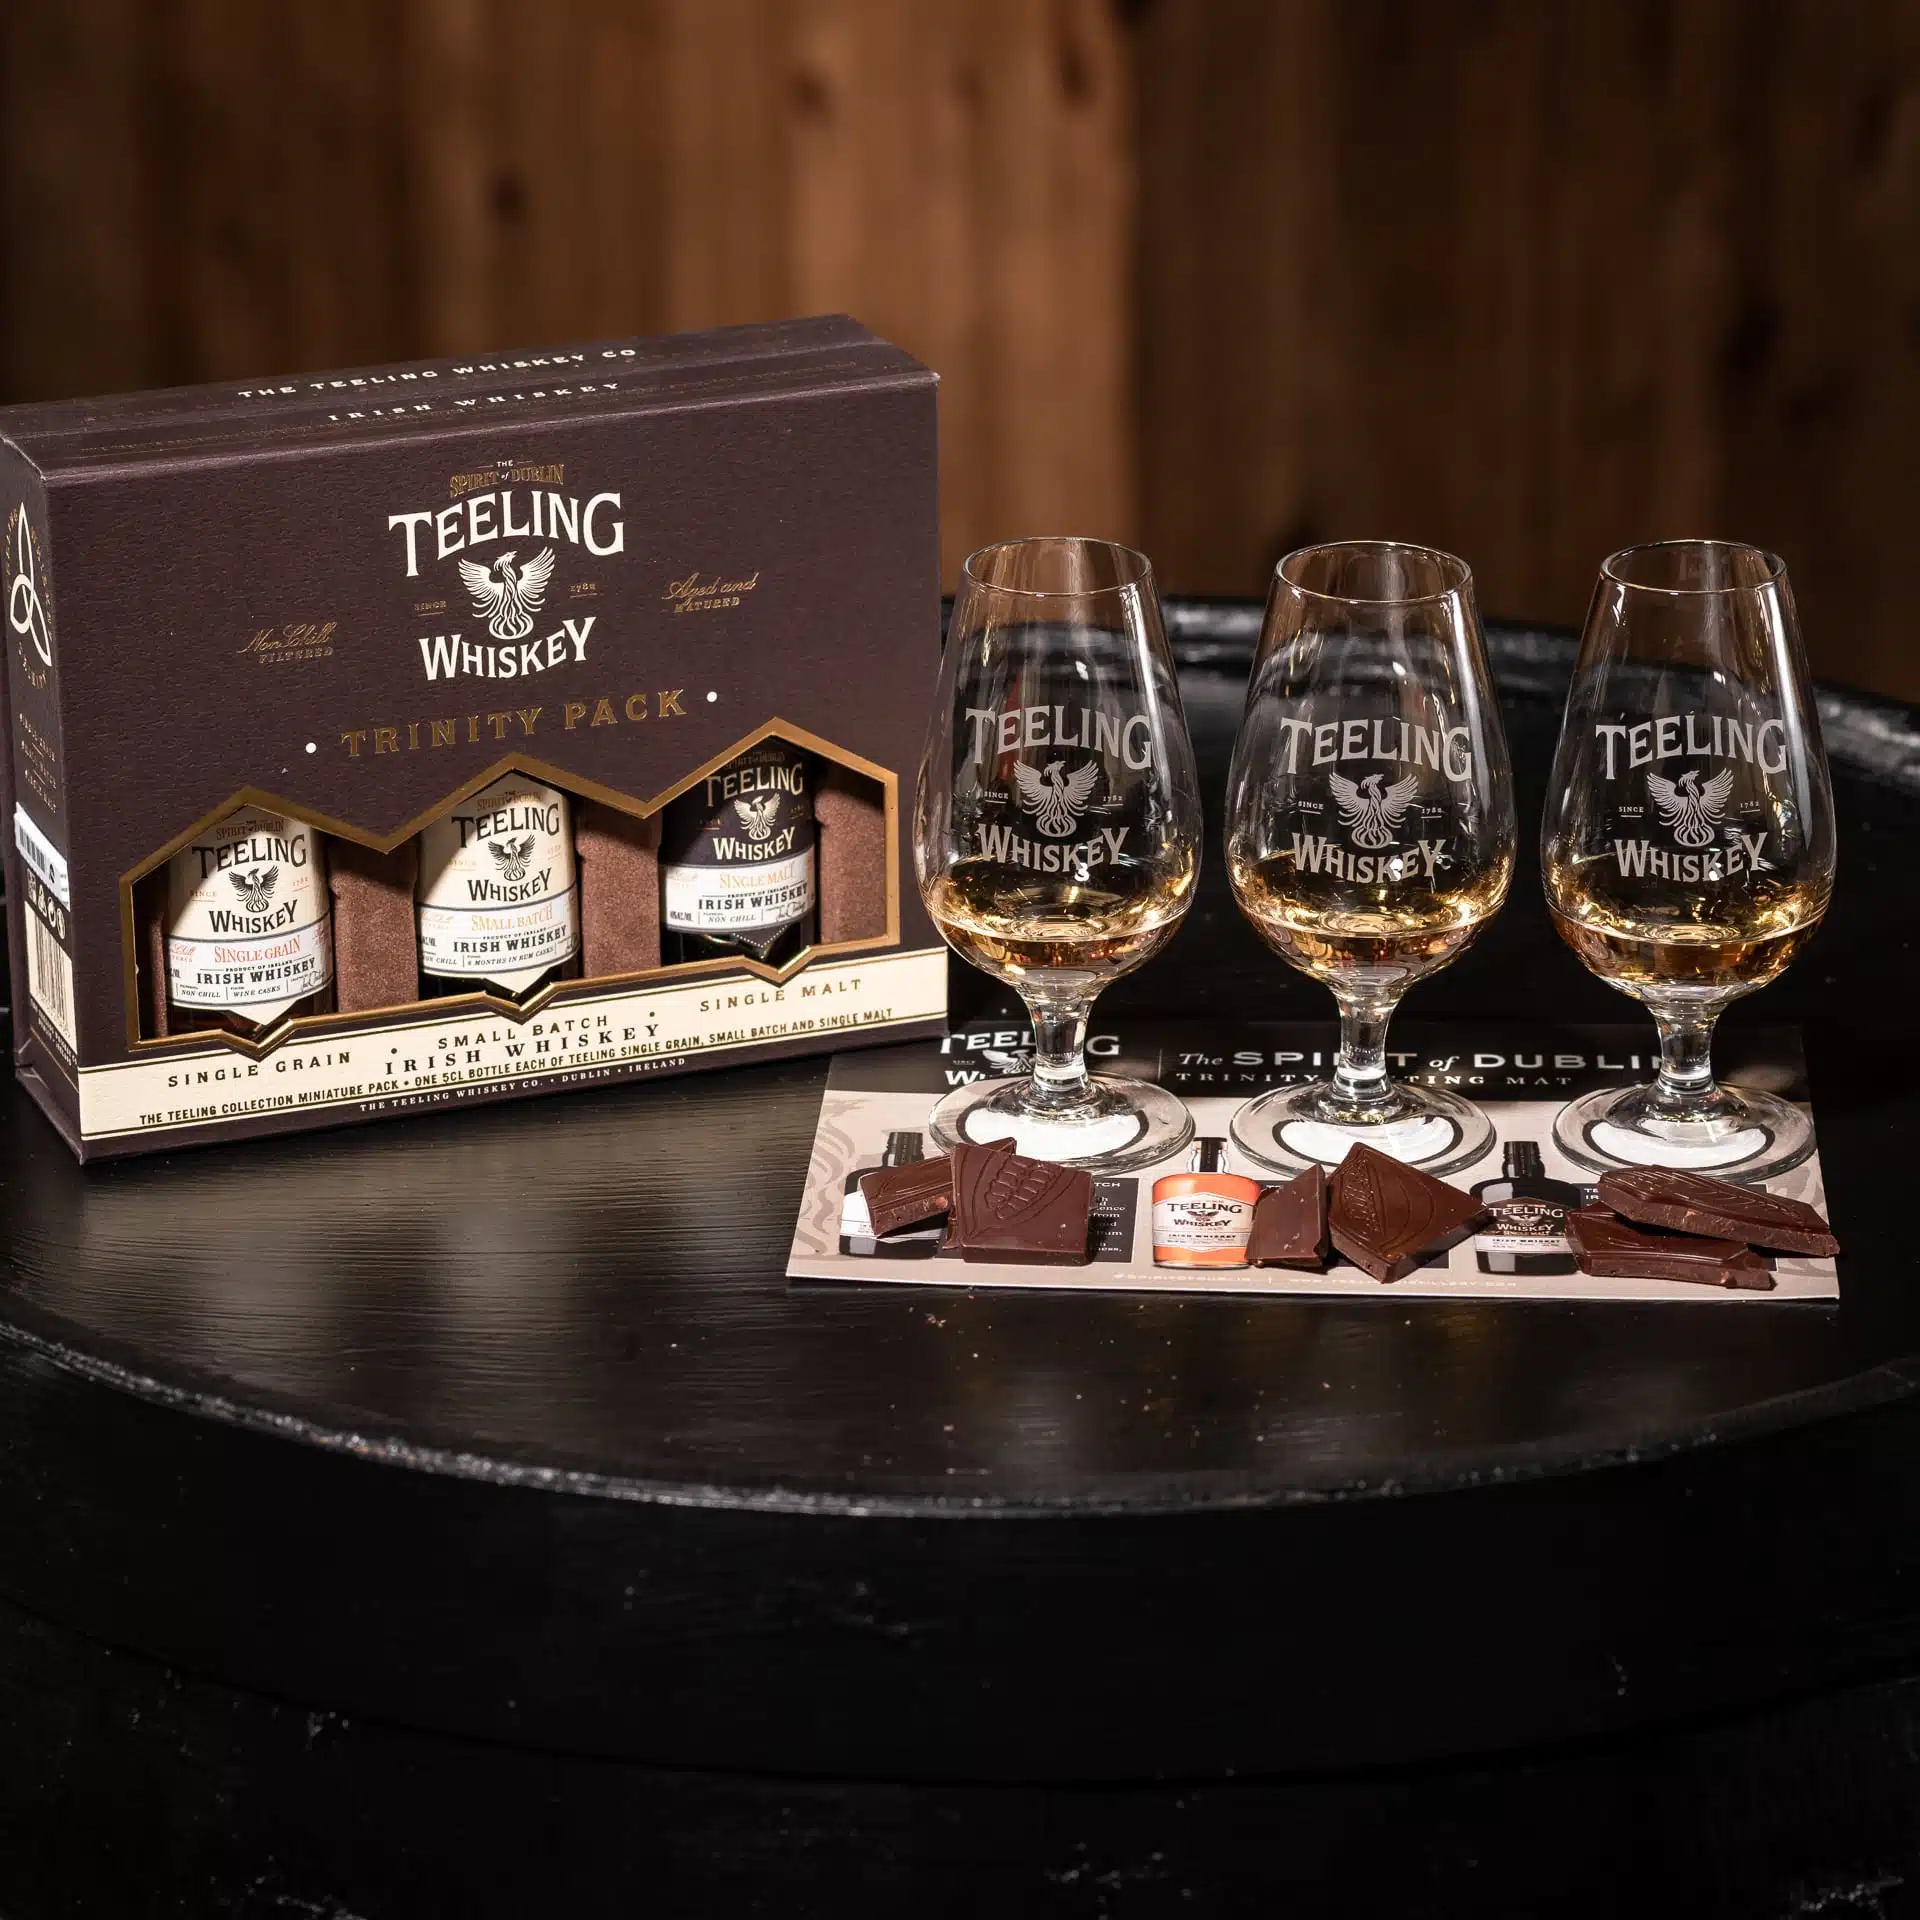 Teeling Whiskey Trinirty Gift pack miniture 5cl bottles, with a selection of chocolate from local Dublin producer Proper Chocolate 